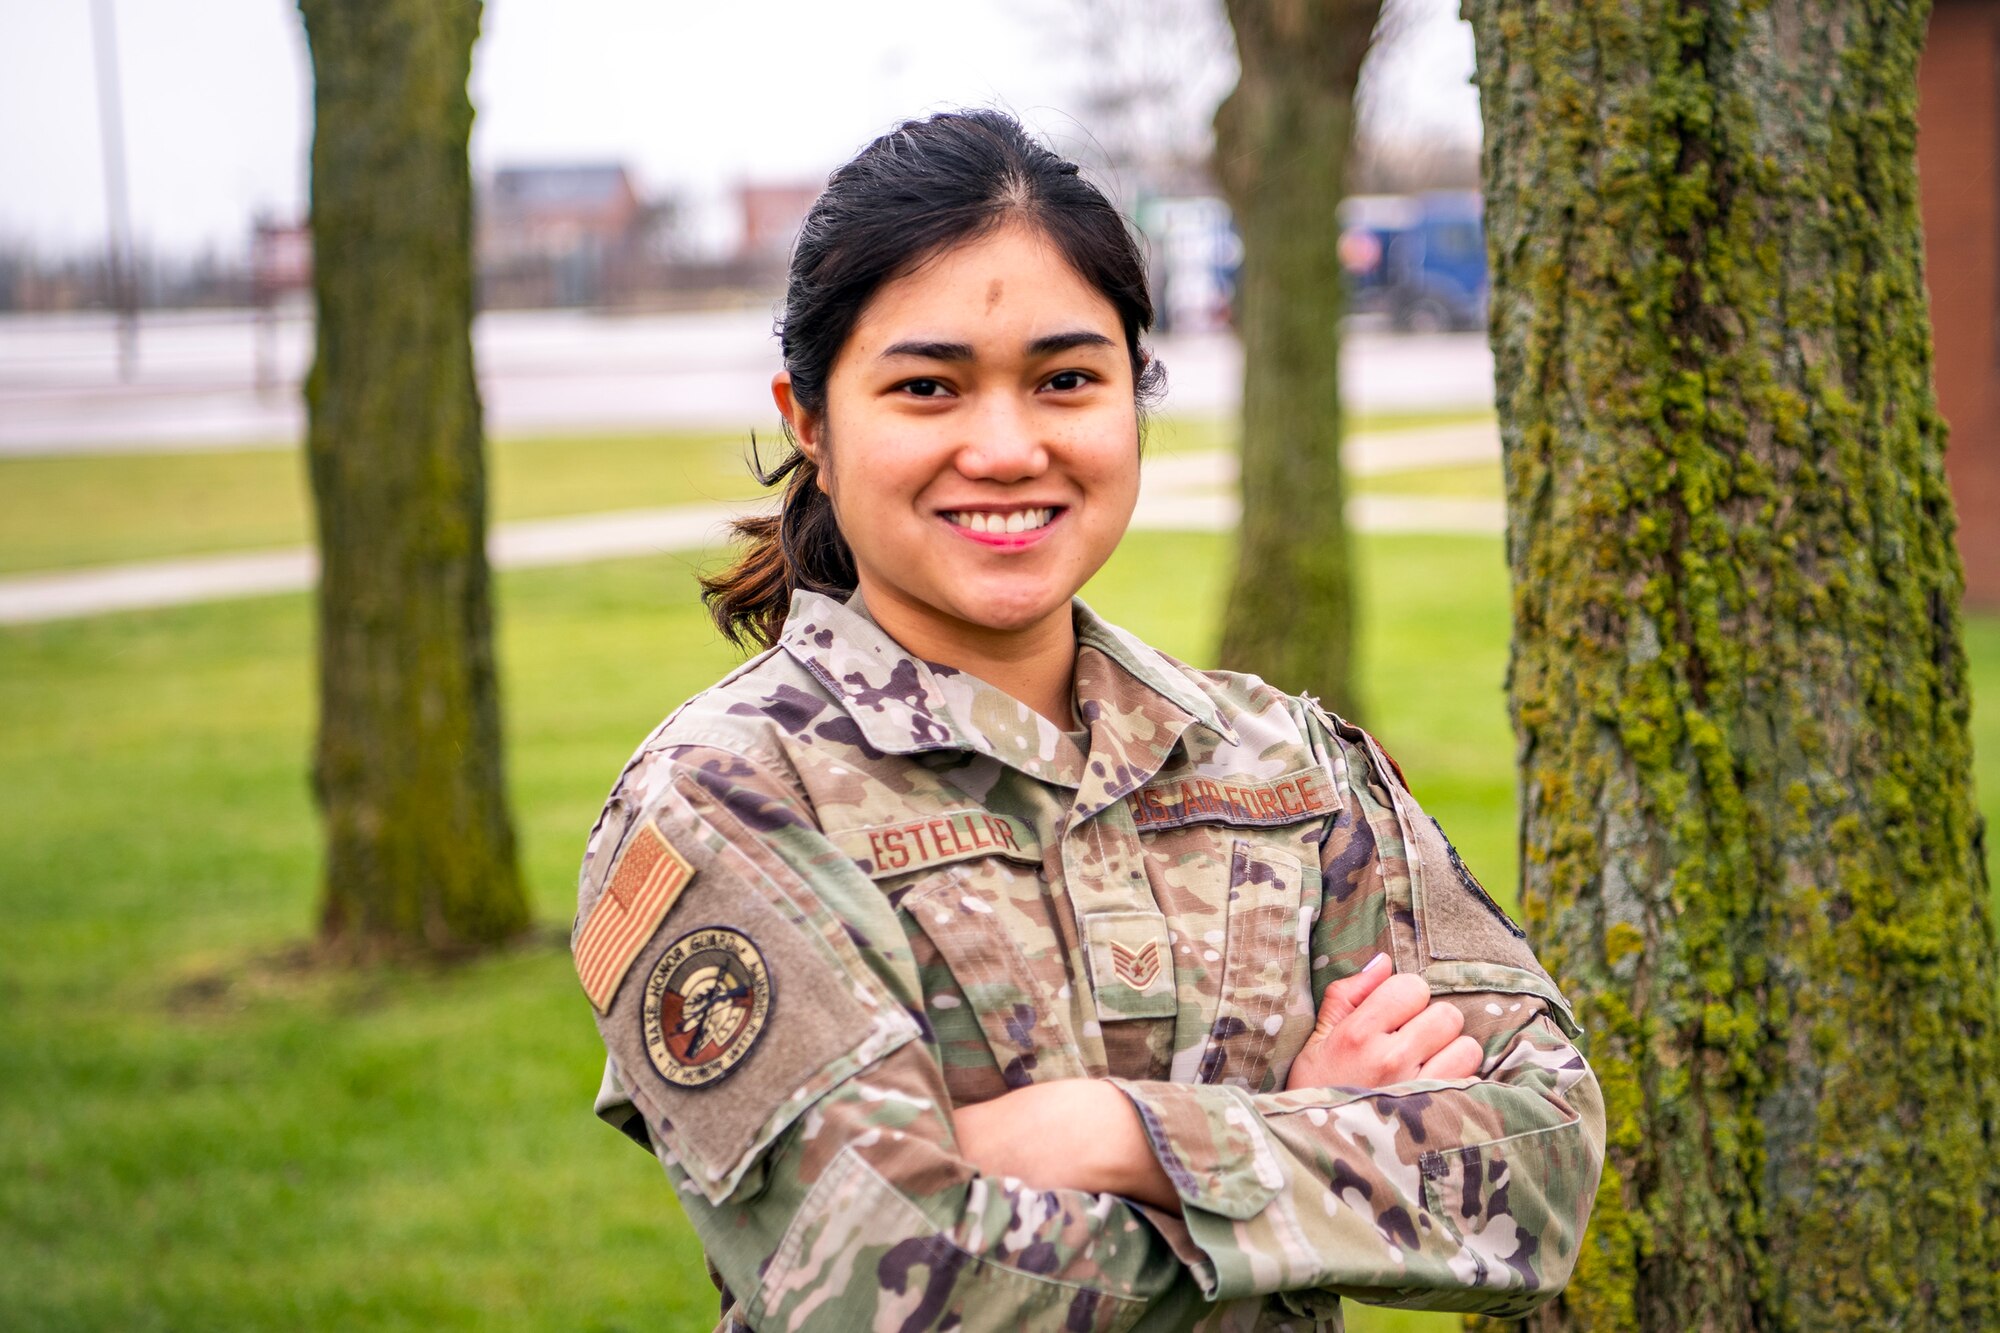 U.S. Air Force Staff Sgt. Bloom Marie Esteller, 423d Air Base Group NCO in Charge Honor Guard, poses for a photo at RAF Alconbury, England, March 7, 2023. This photo is part of a project to highlight female Airmen from across the wing in honor of Women's History Month. (U.S. Air Force phot by Staff Sgt. Eugene Oliver)